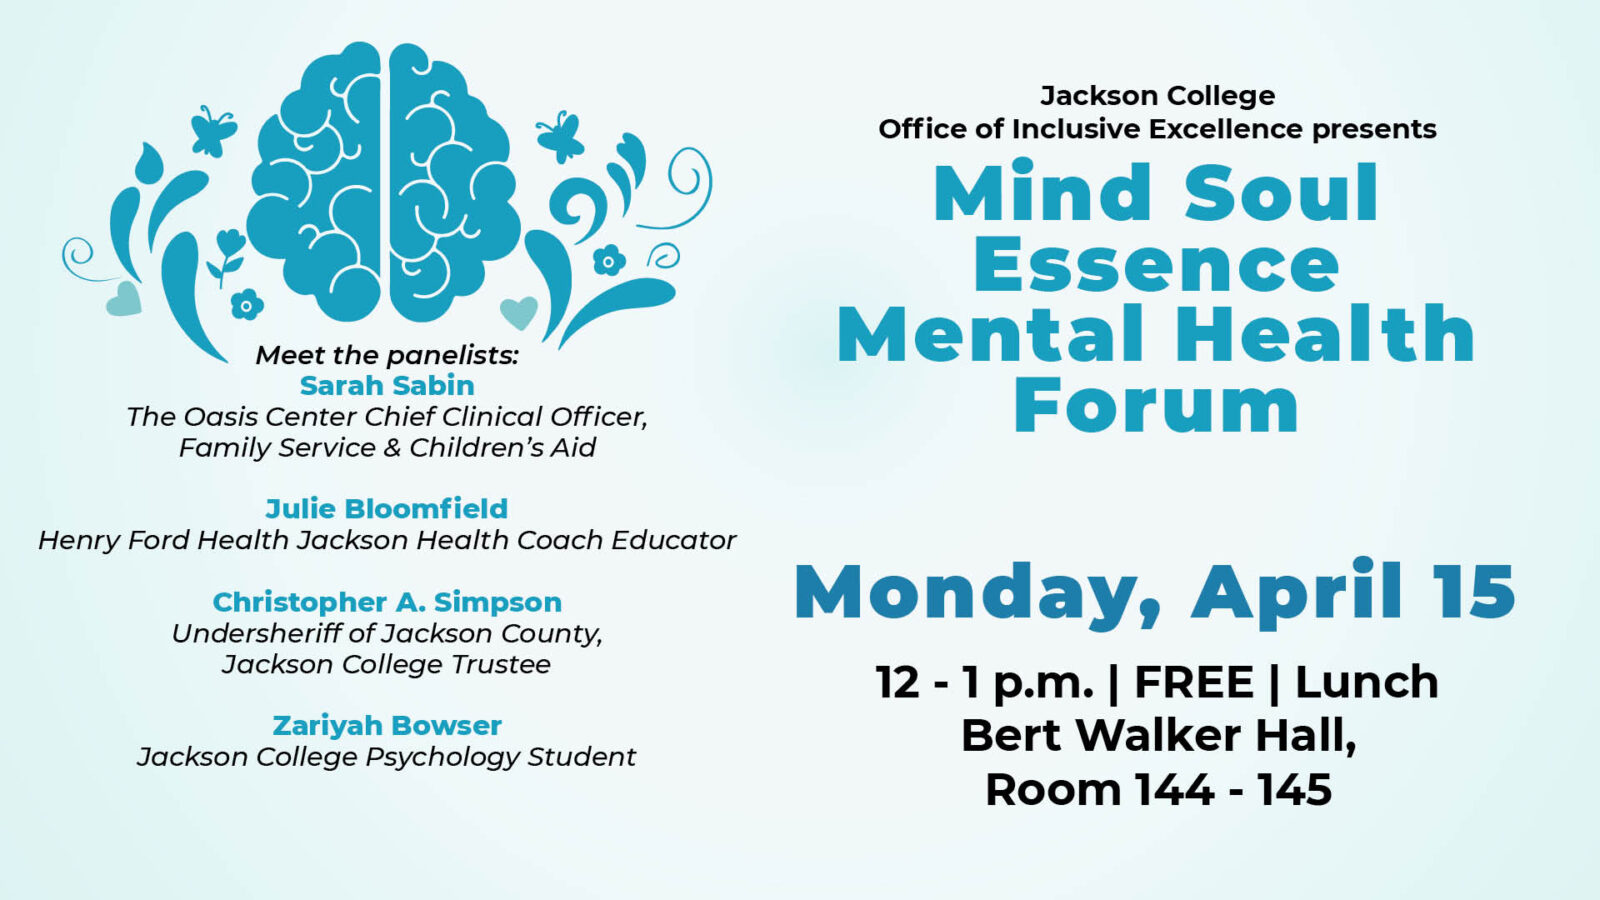 Join us for a thought-provoking conversation about mental health topics